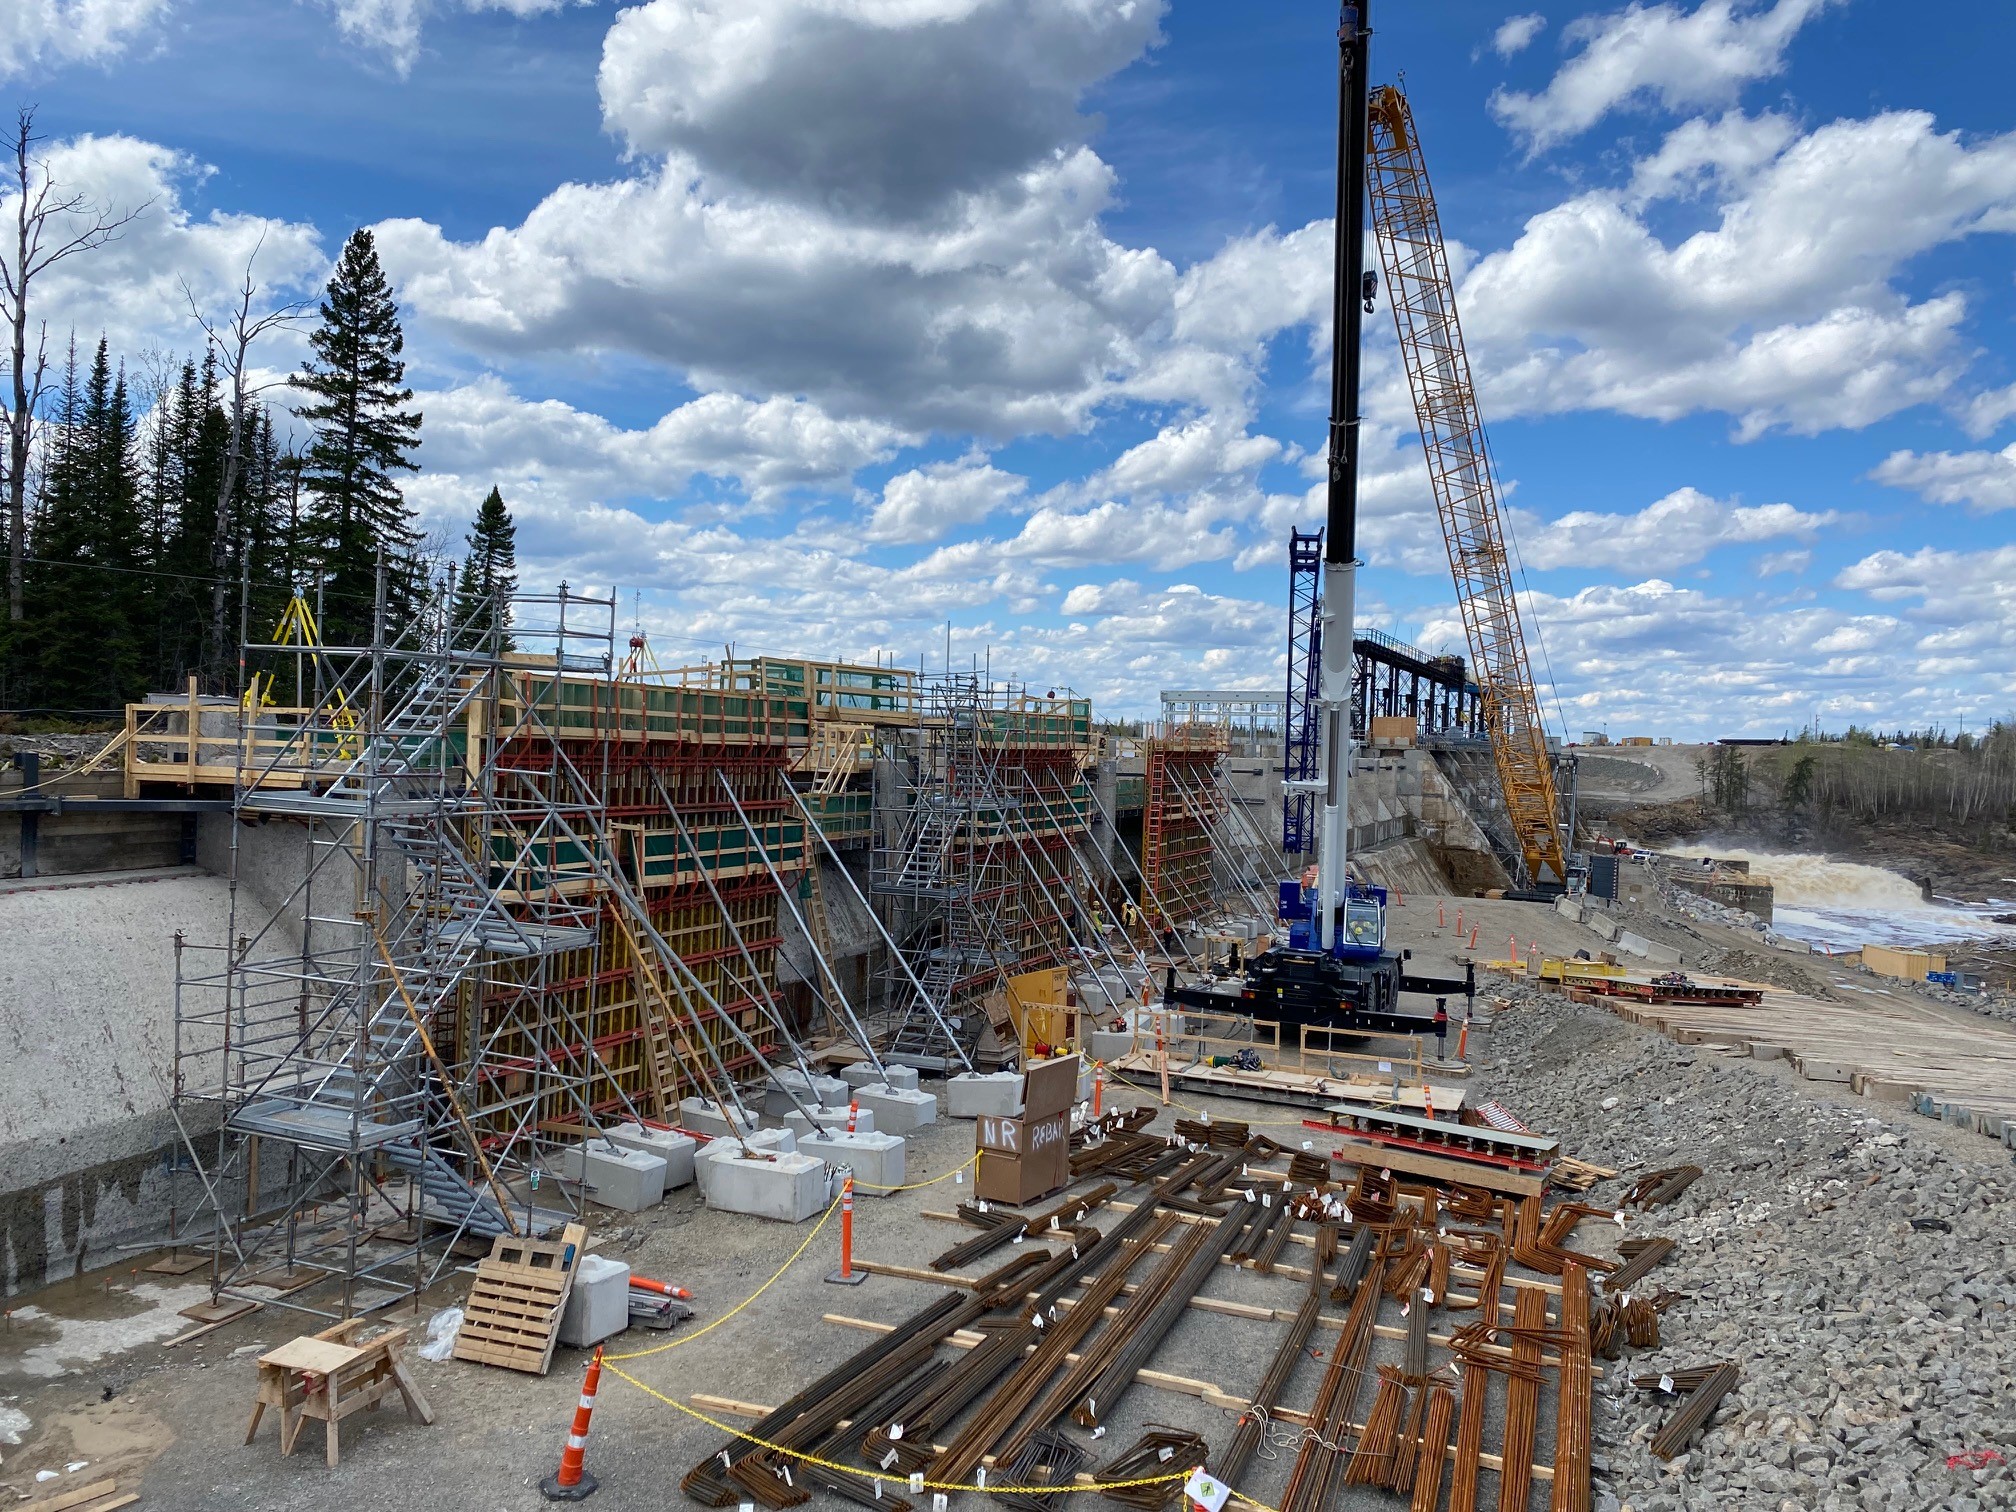 The Smoky Falls Dam Safety Project is underway to rehabilitate the 100-year-old spillway and sluiceway structures at OPG’s Smoky Falls Generating Station in northeast Ontario.